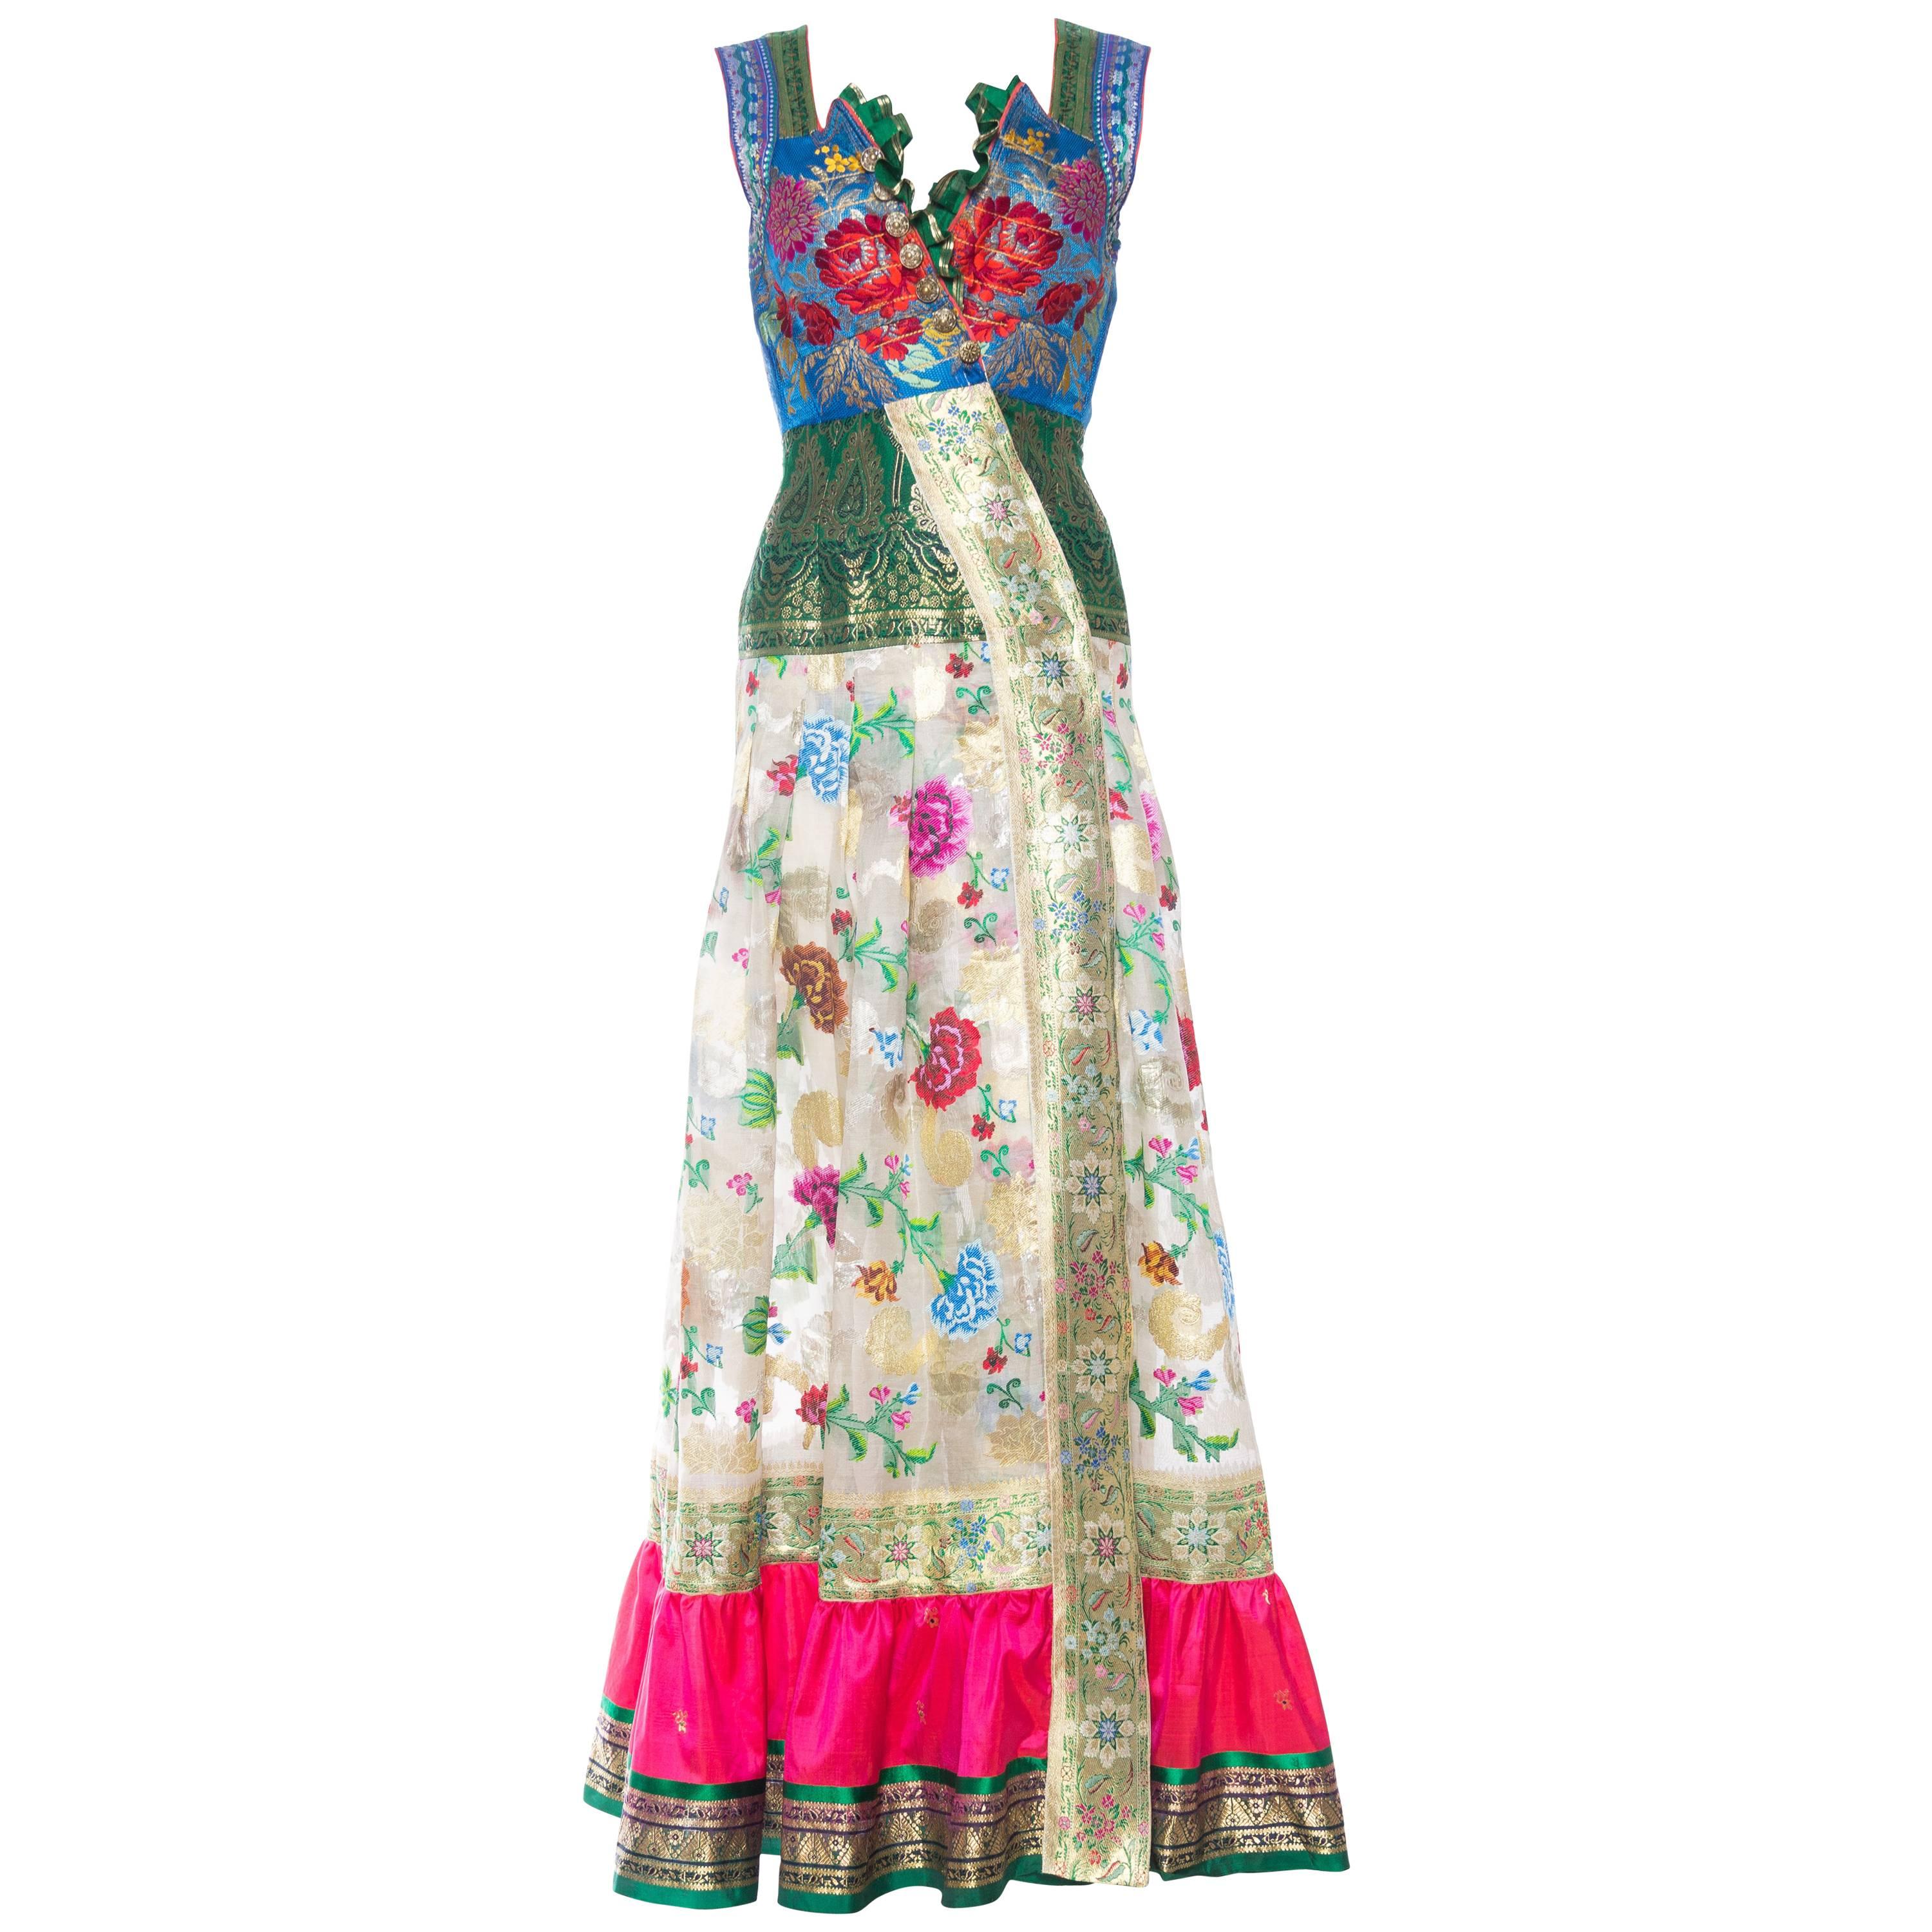 Dress made from Antique Folk and Indian Silks with Metallics